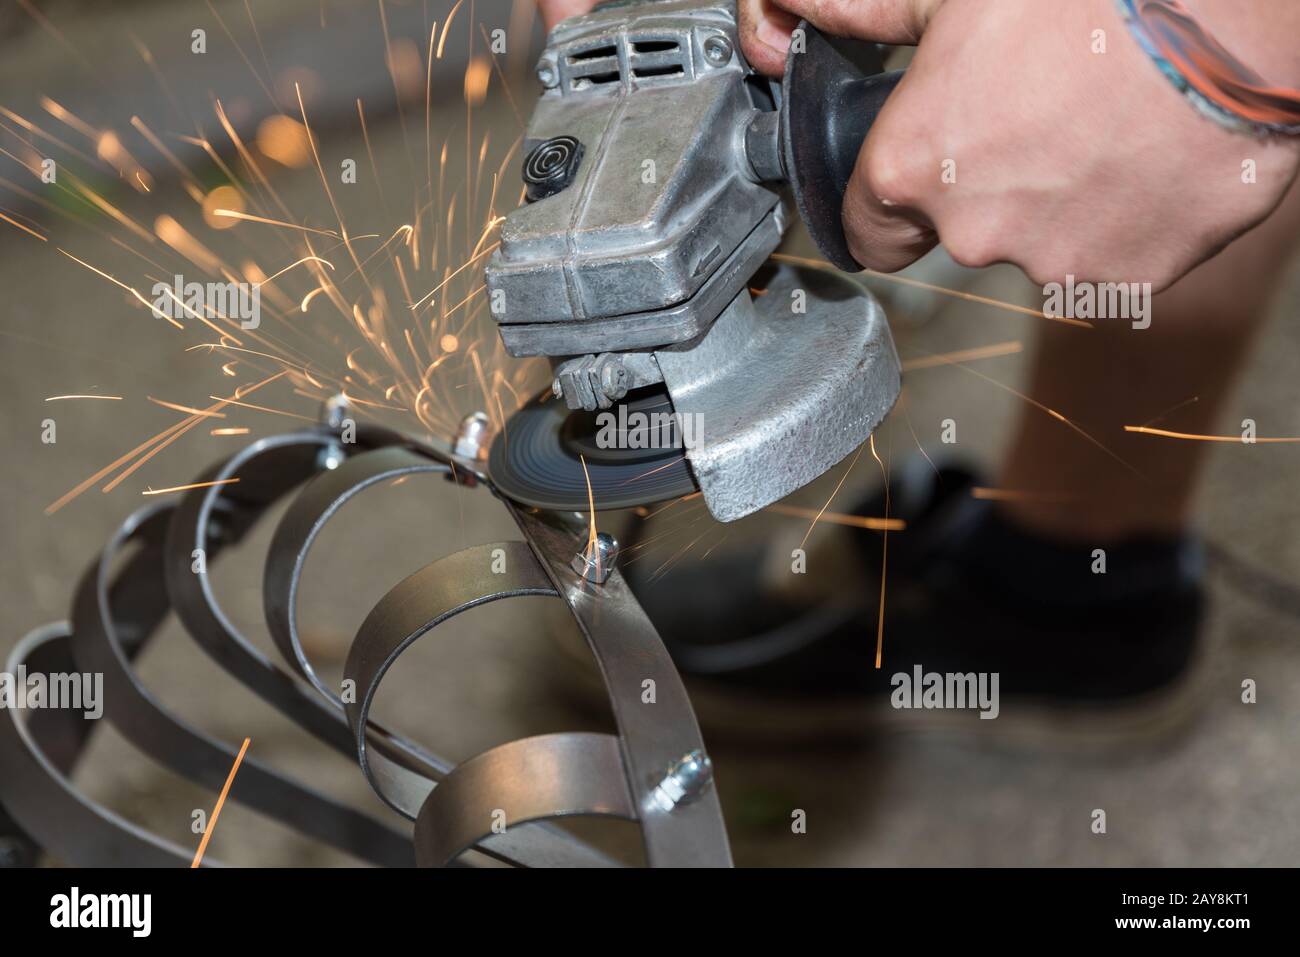 Flying sparks during metalworking with an angle grinder - close-up Stock Photo